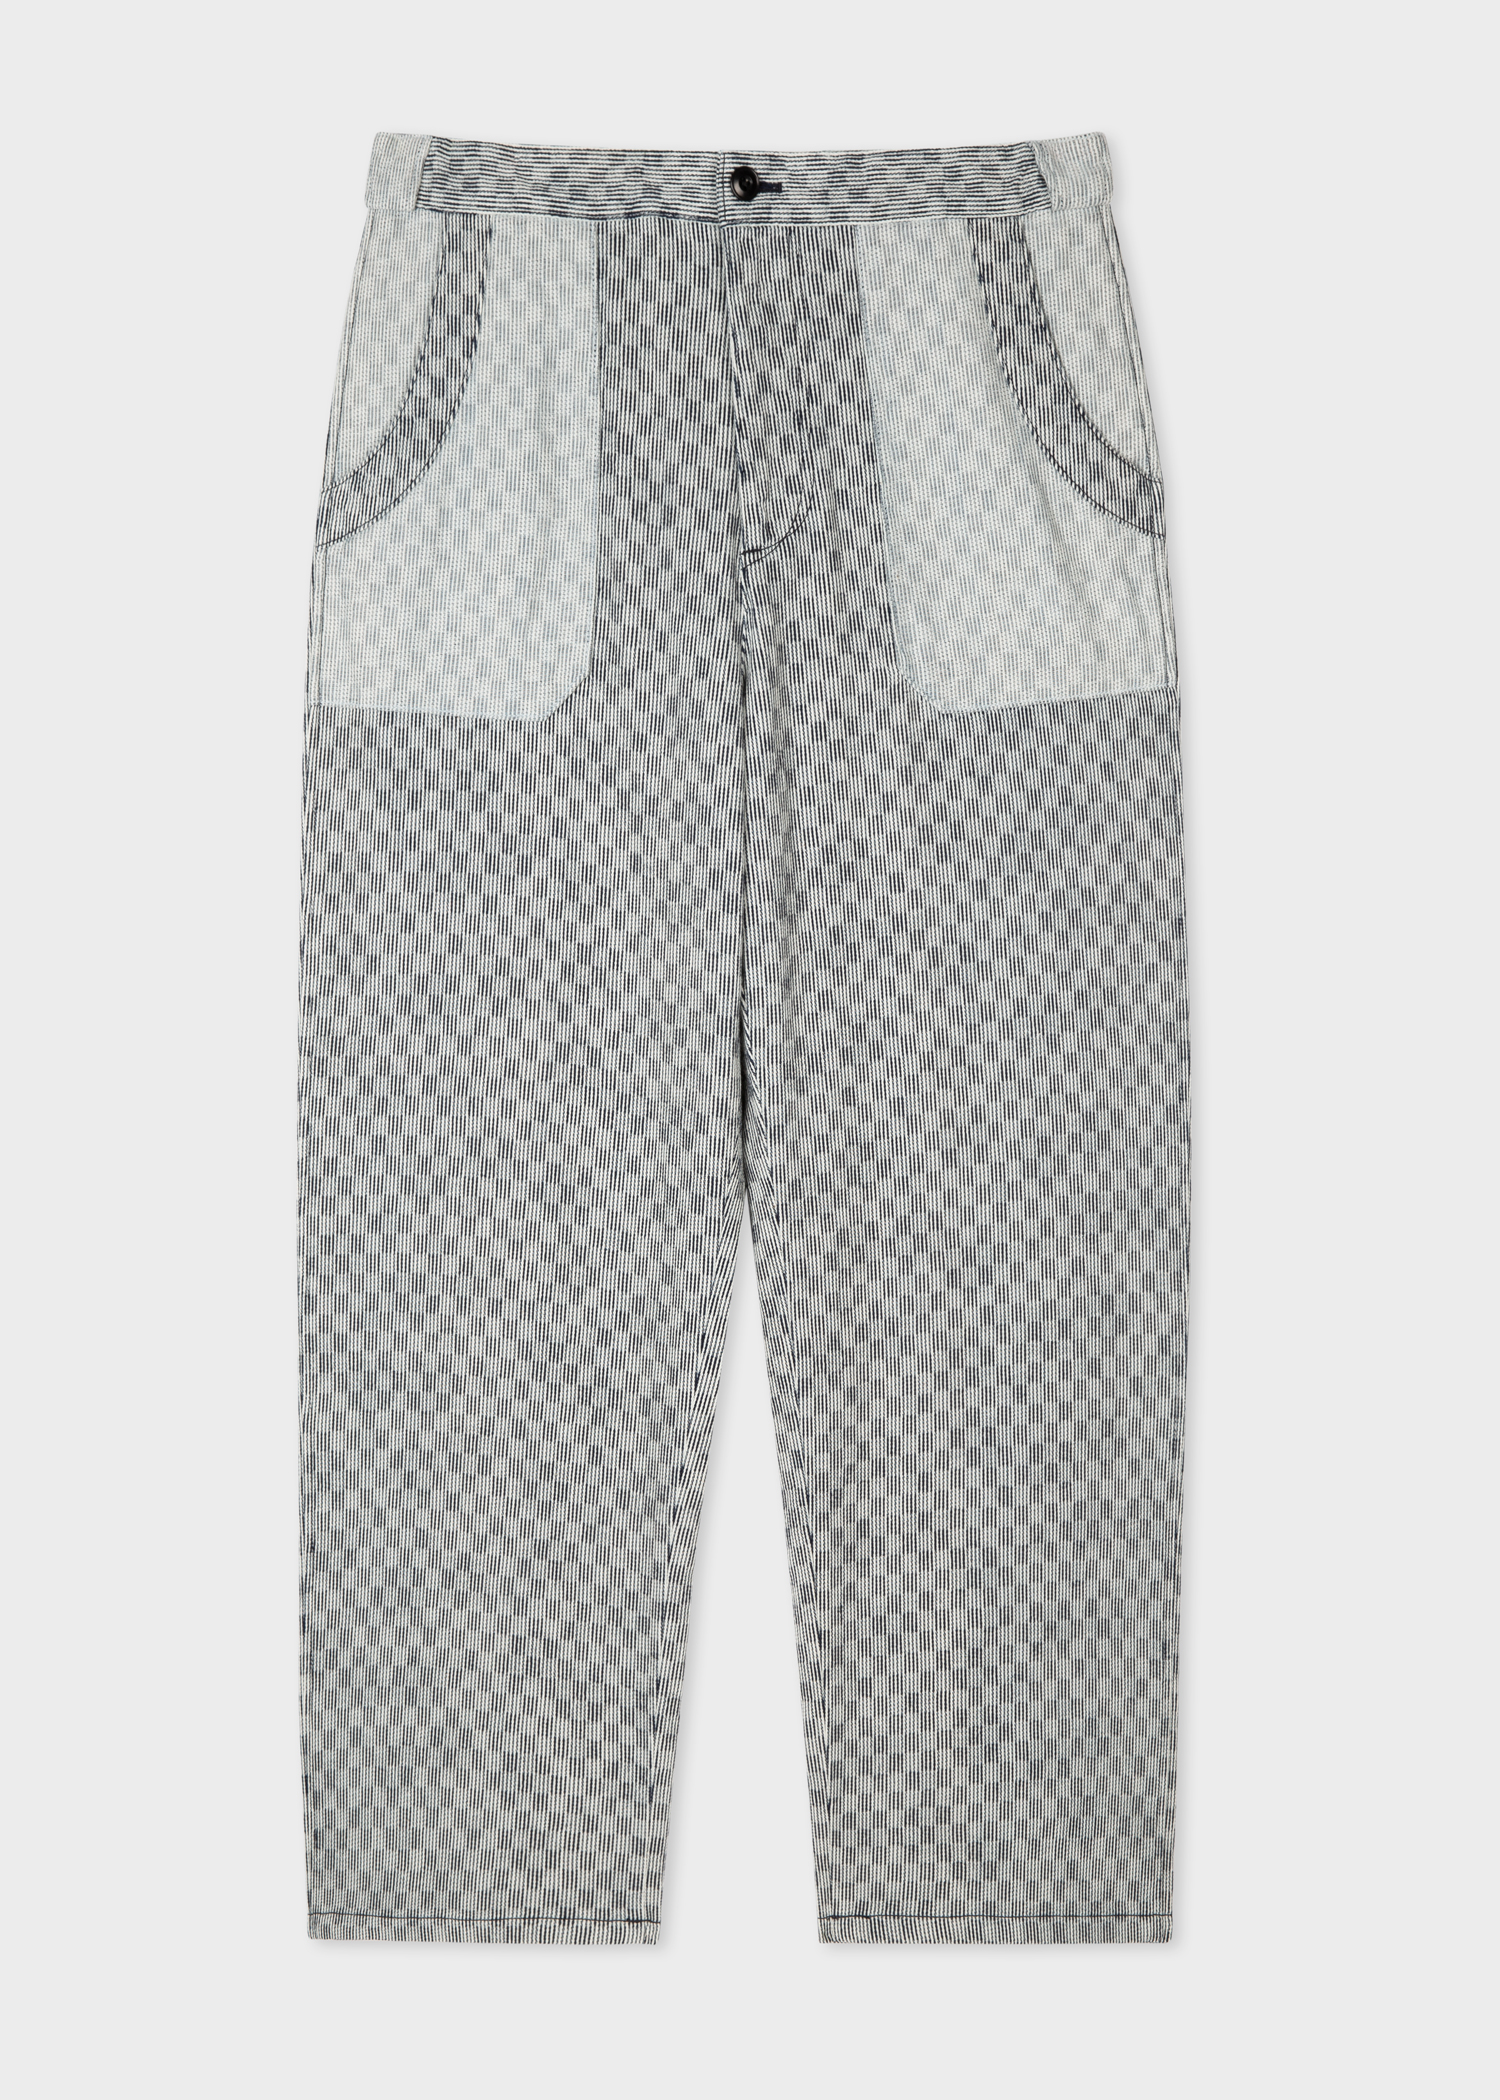 Men's Jacquard Check Red Ear Trousers